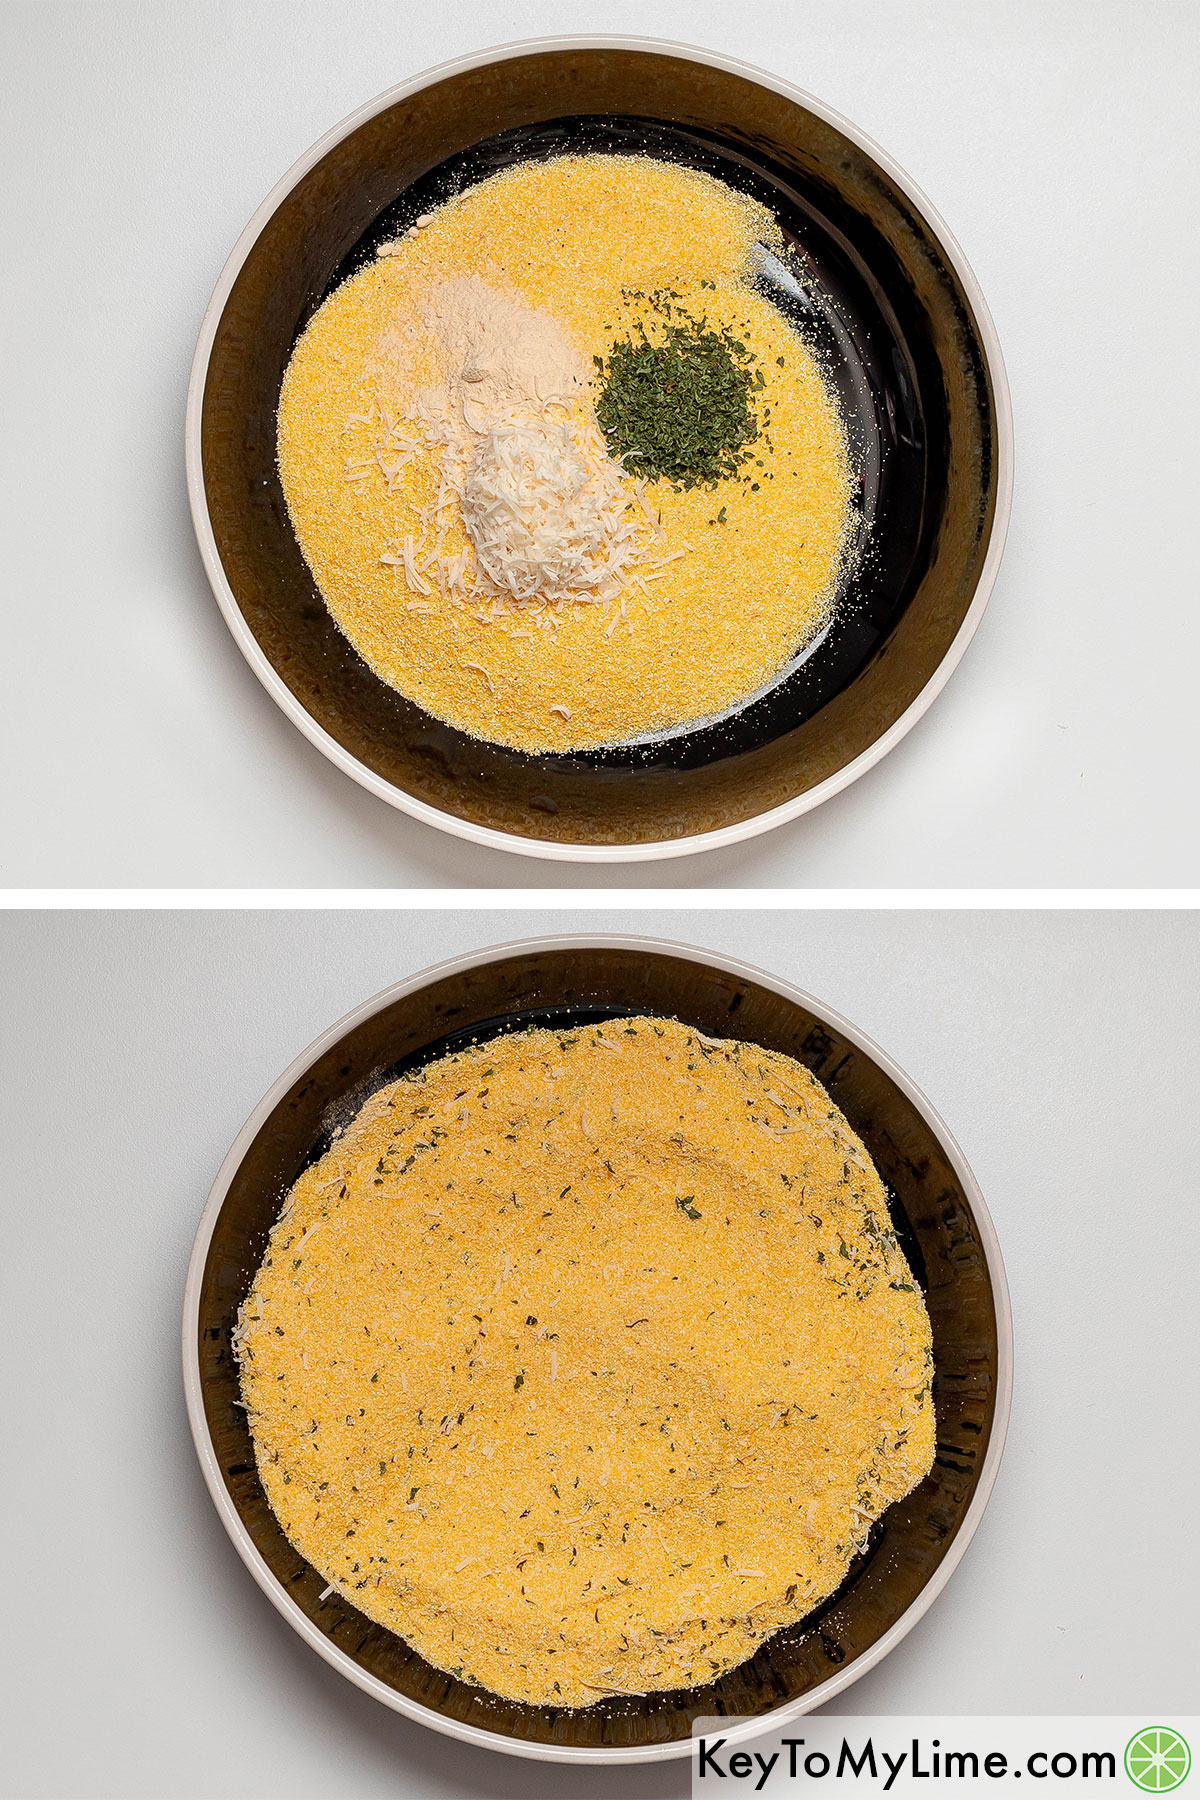 Adding garlic powder, parsley, and cornmeal to a shallow bowl, and then mixing together.